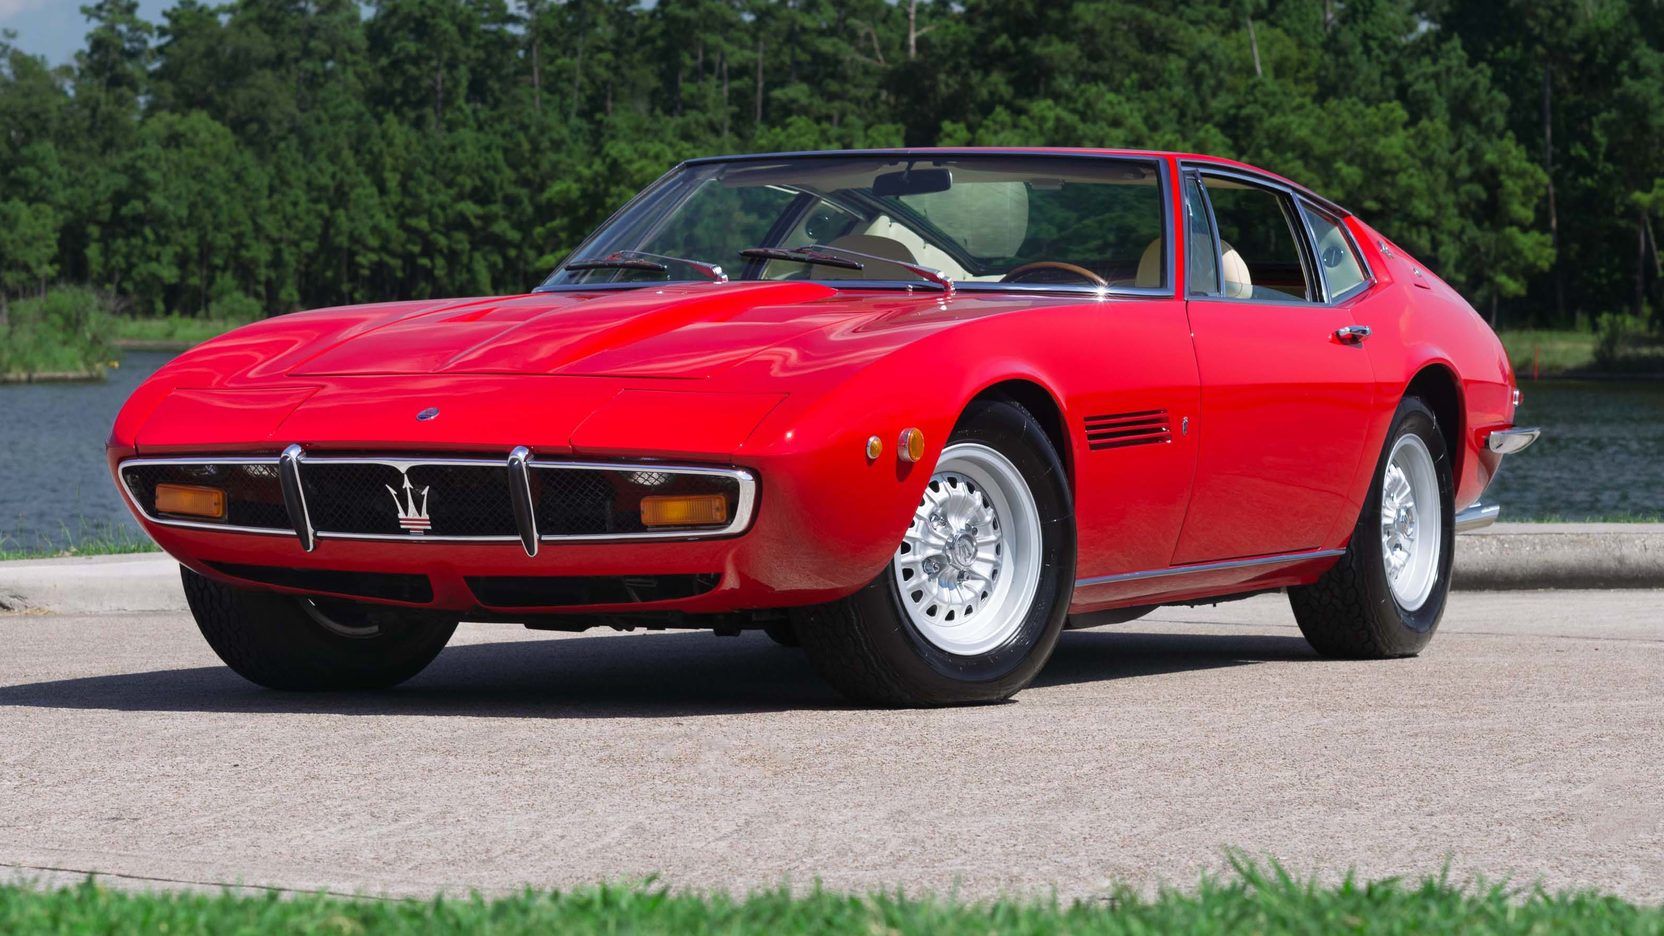 1971 Maserati Ghibli SS up for auction